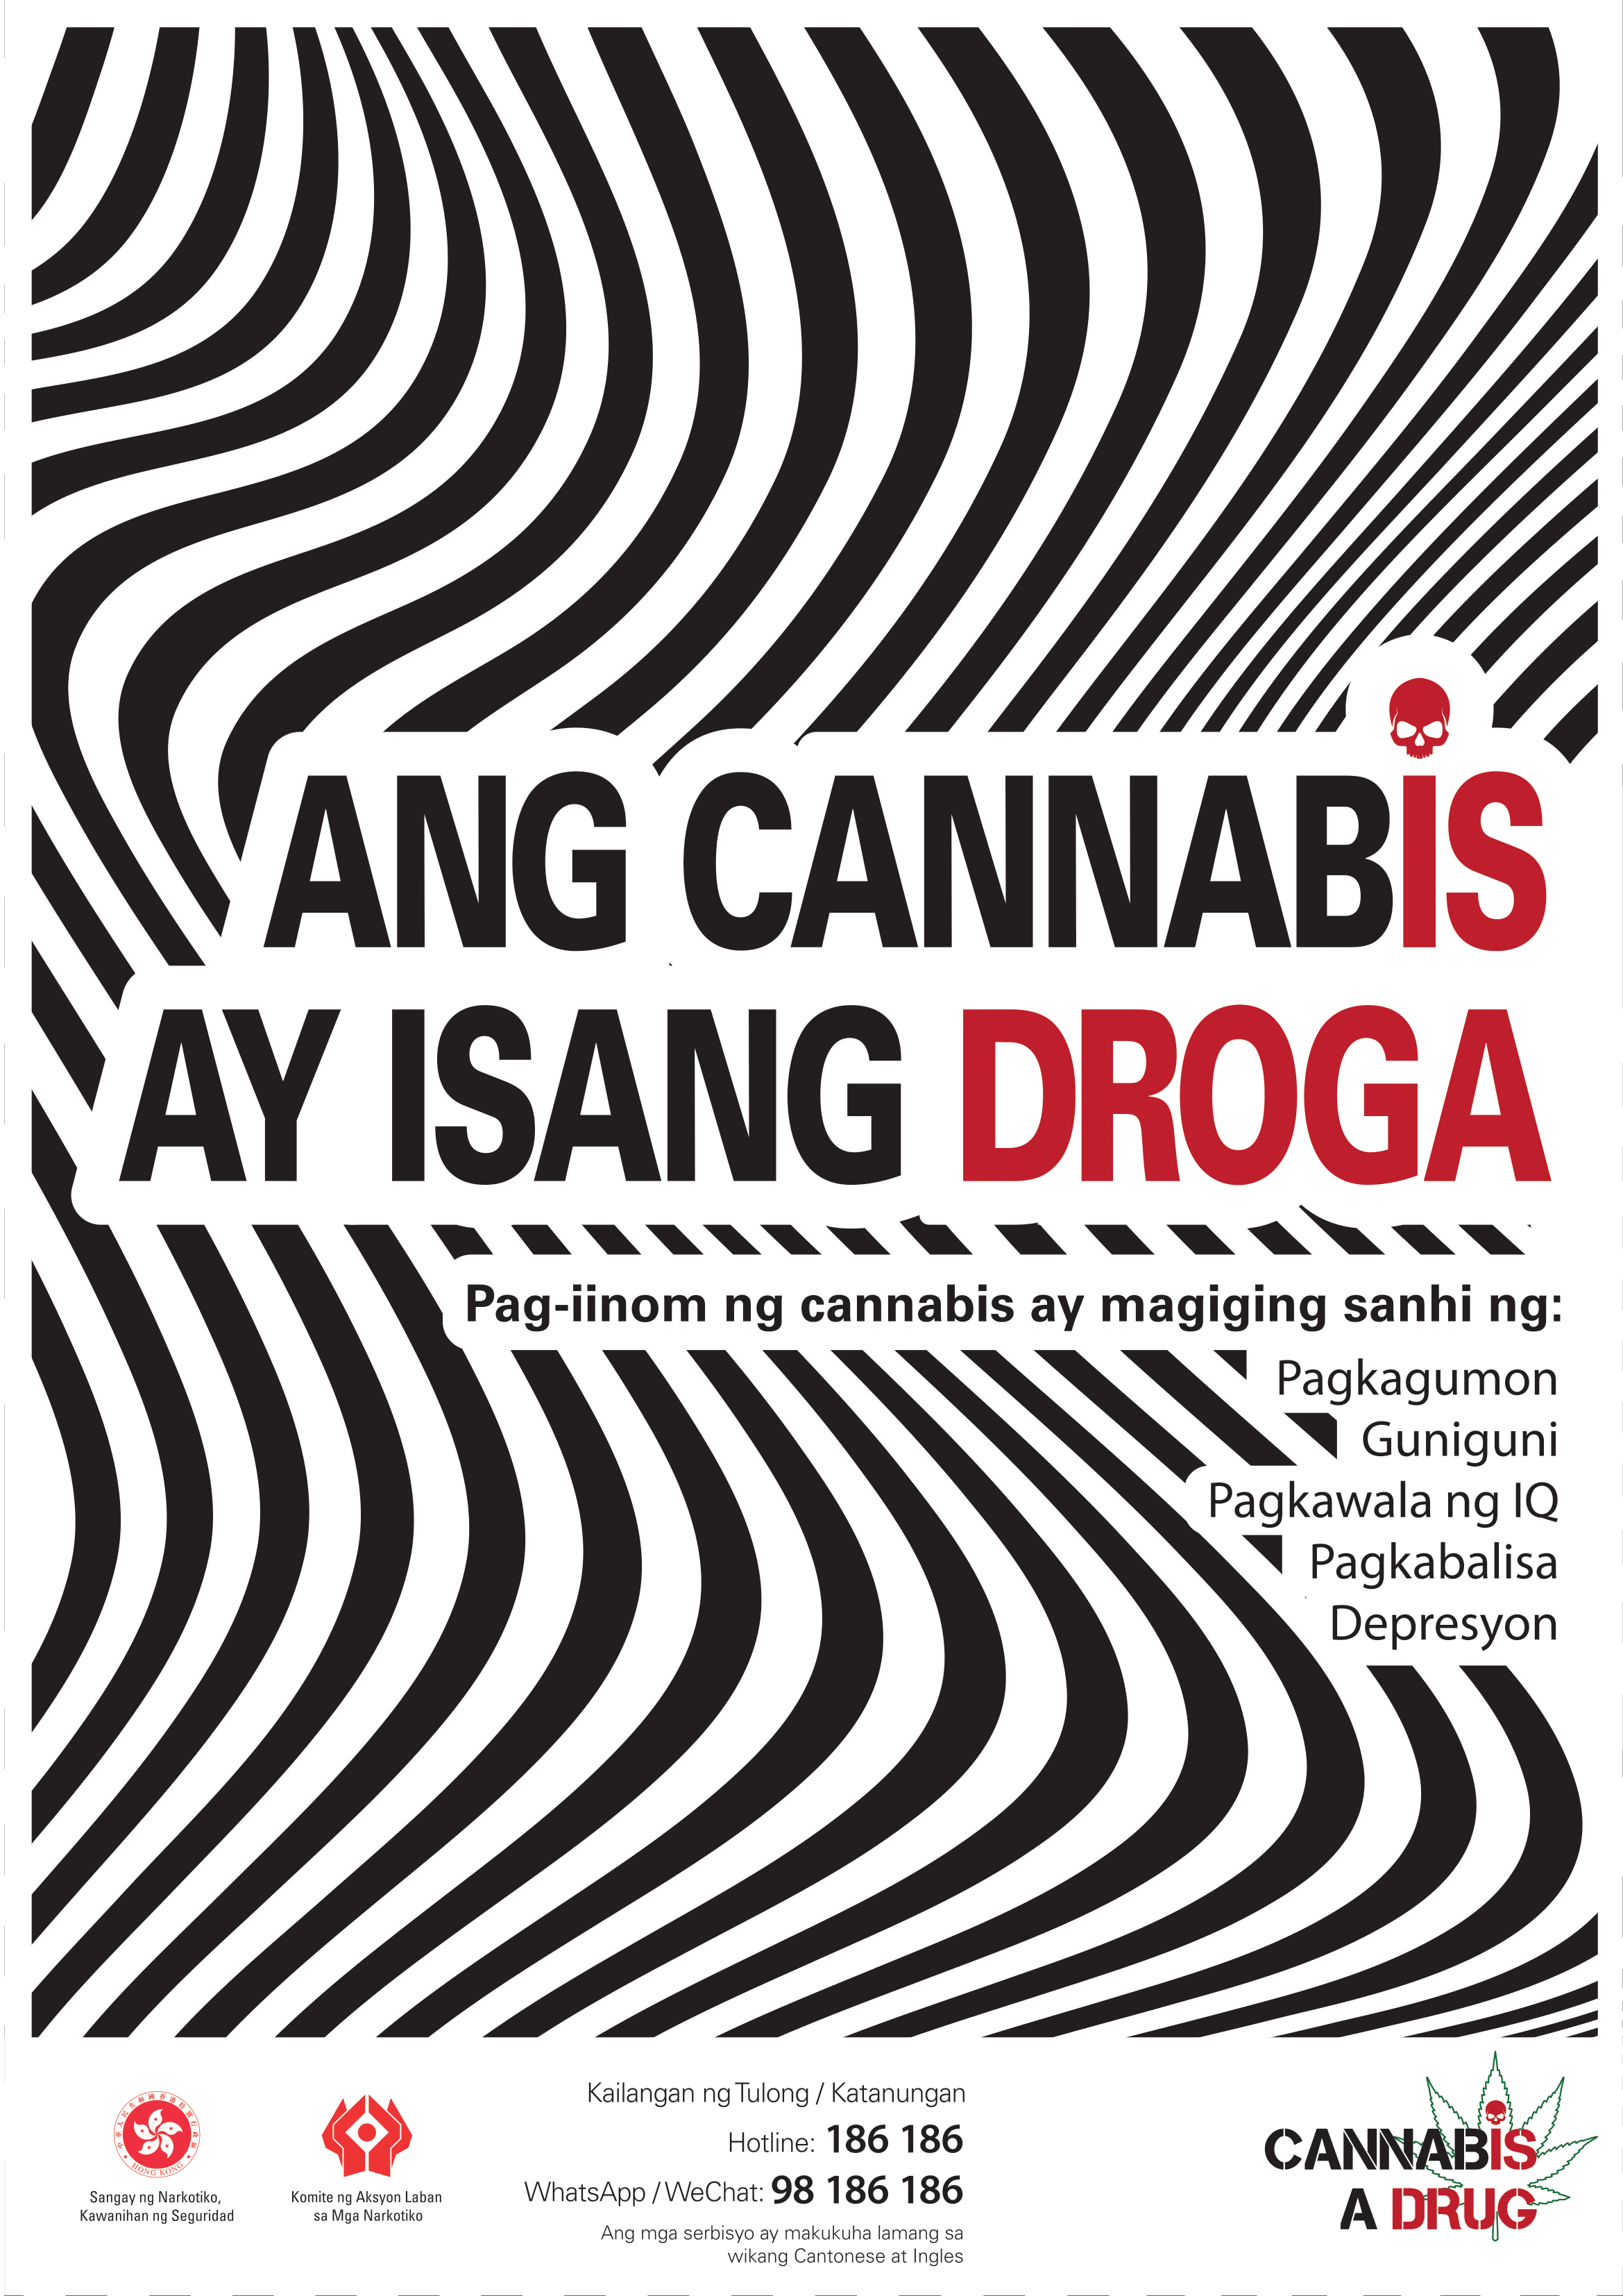 Anti-drug poster "Cannabis is a drug" - Tagalog version